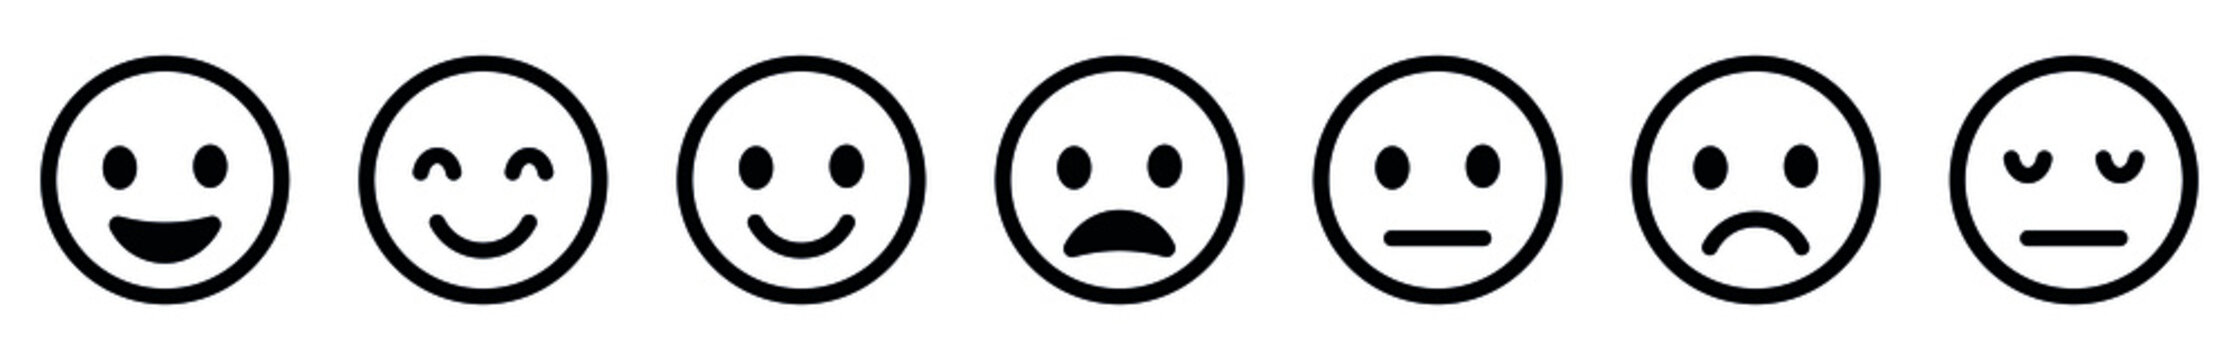 outline Emoji faces collection, Happy and sad emoji. Happy and sad emoji smiley faces line art vector icon for apps and websites